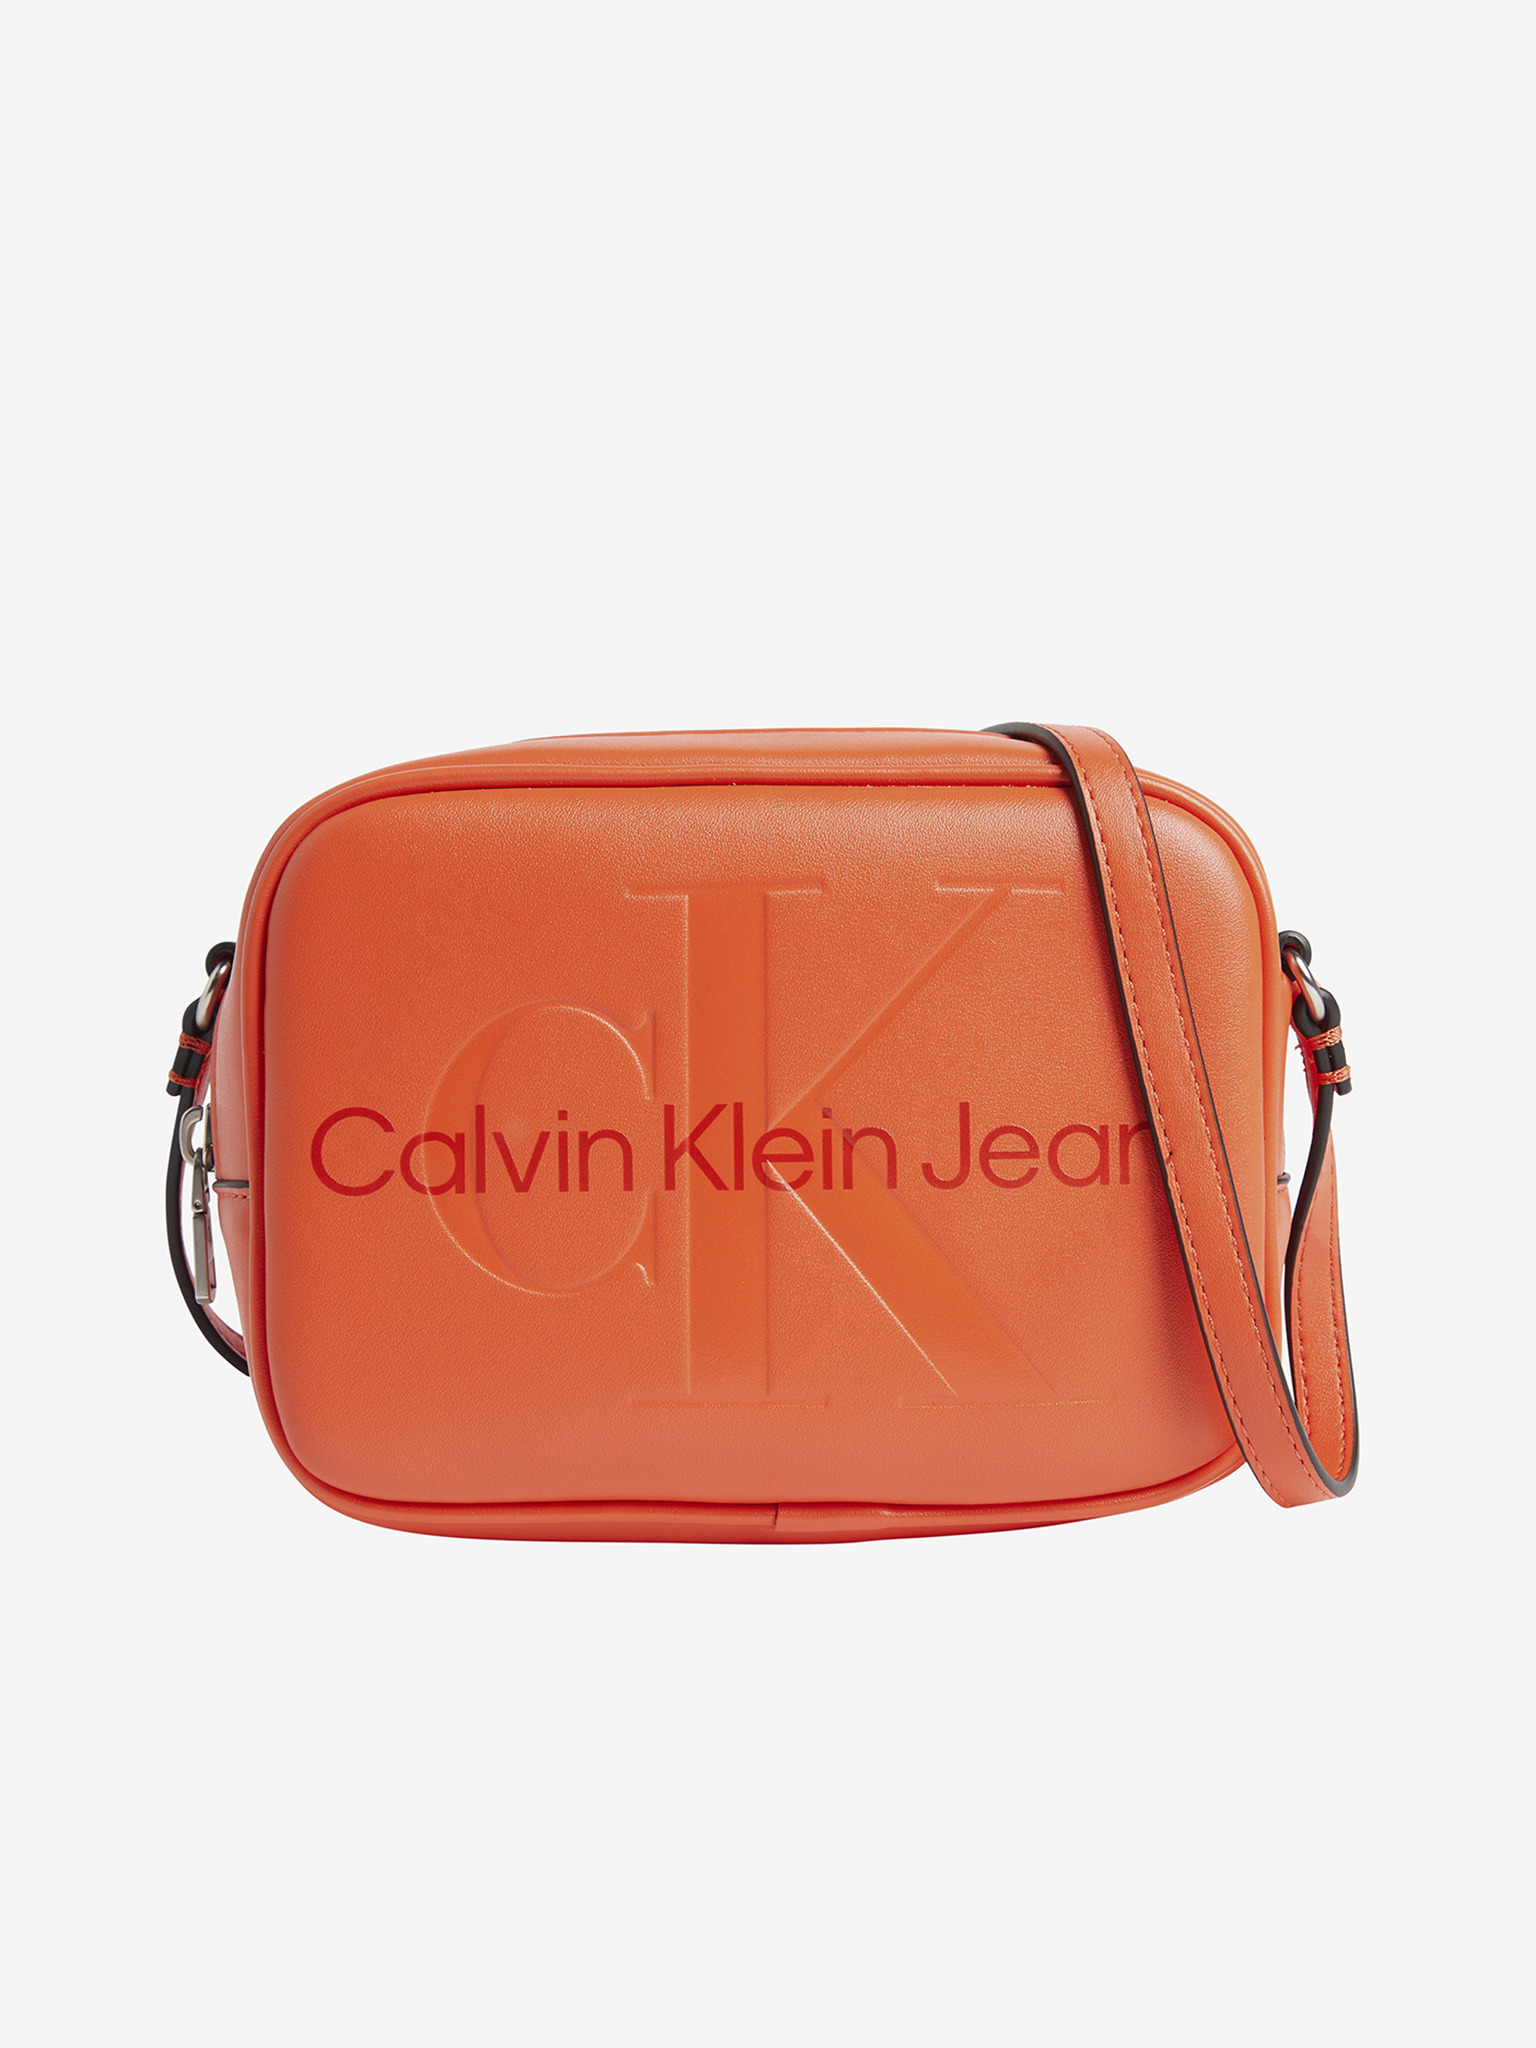 Calvin Klein Jeans cotton monogram logo sculpted camera bag in red - RED